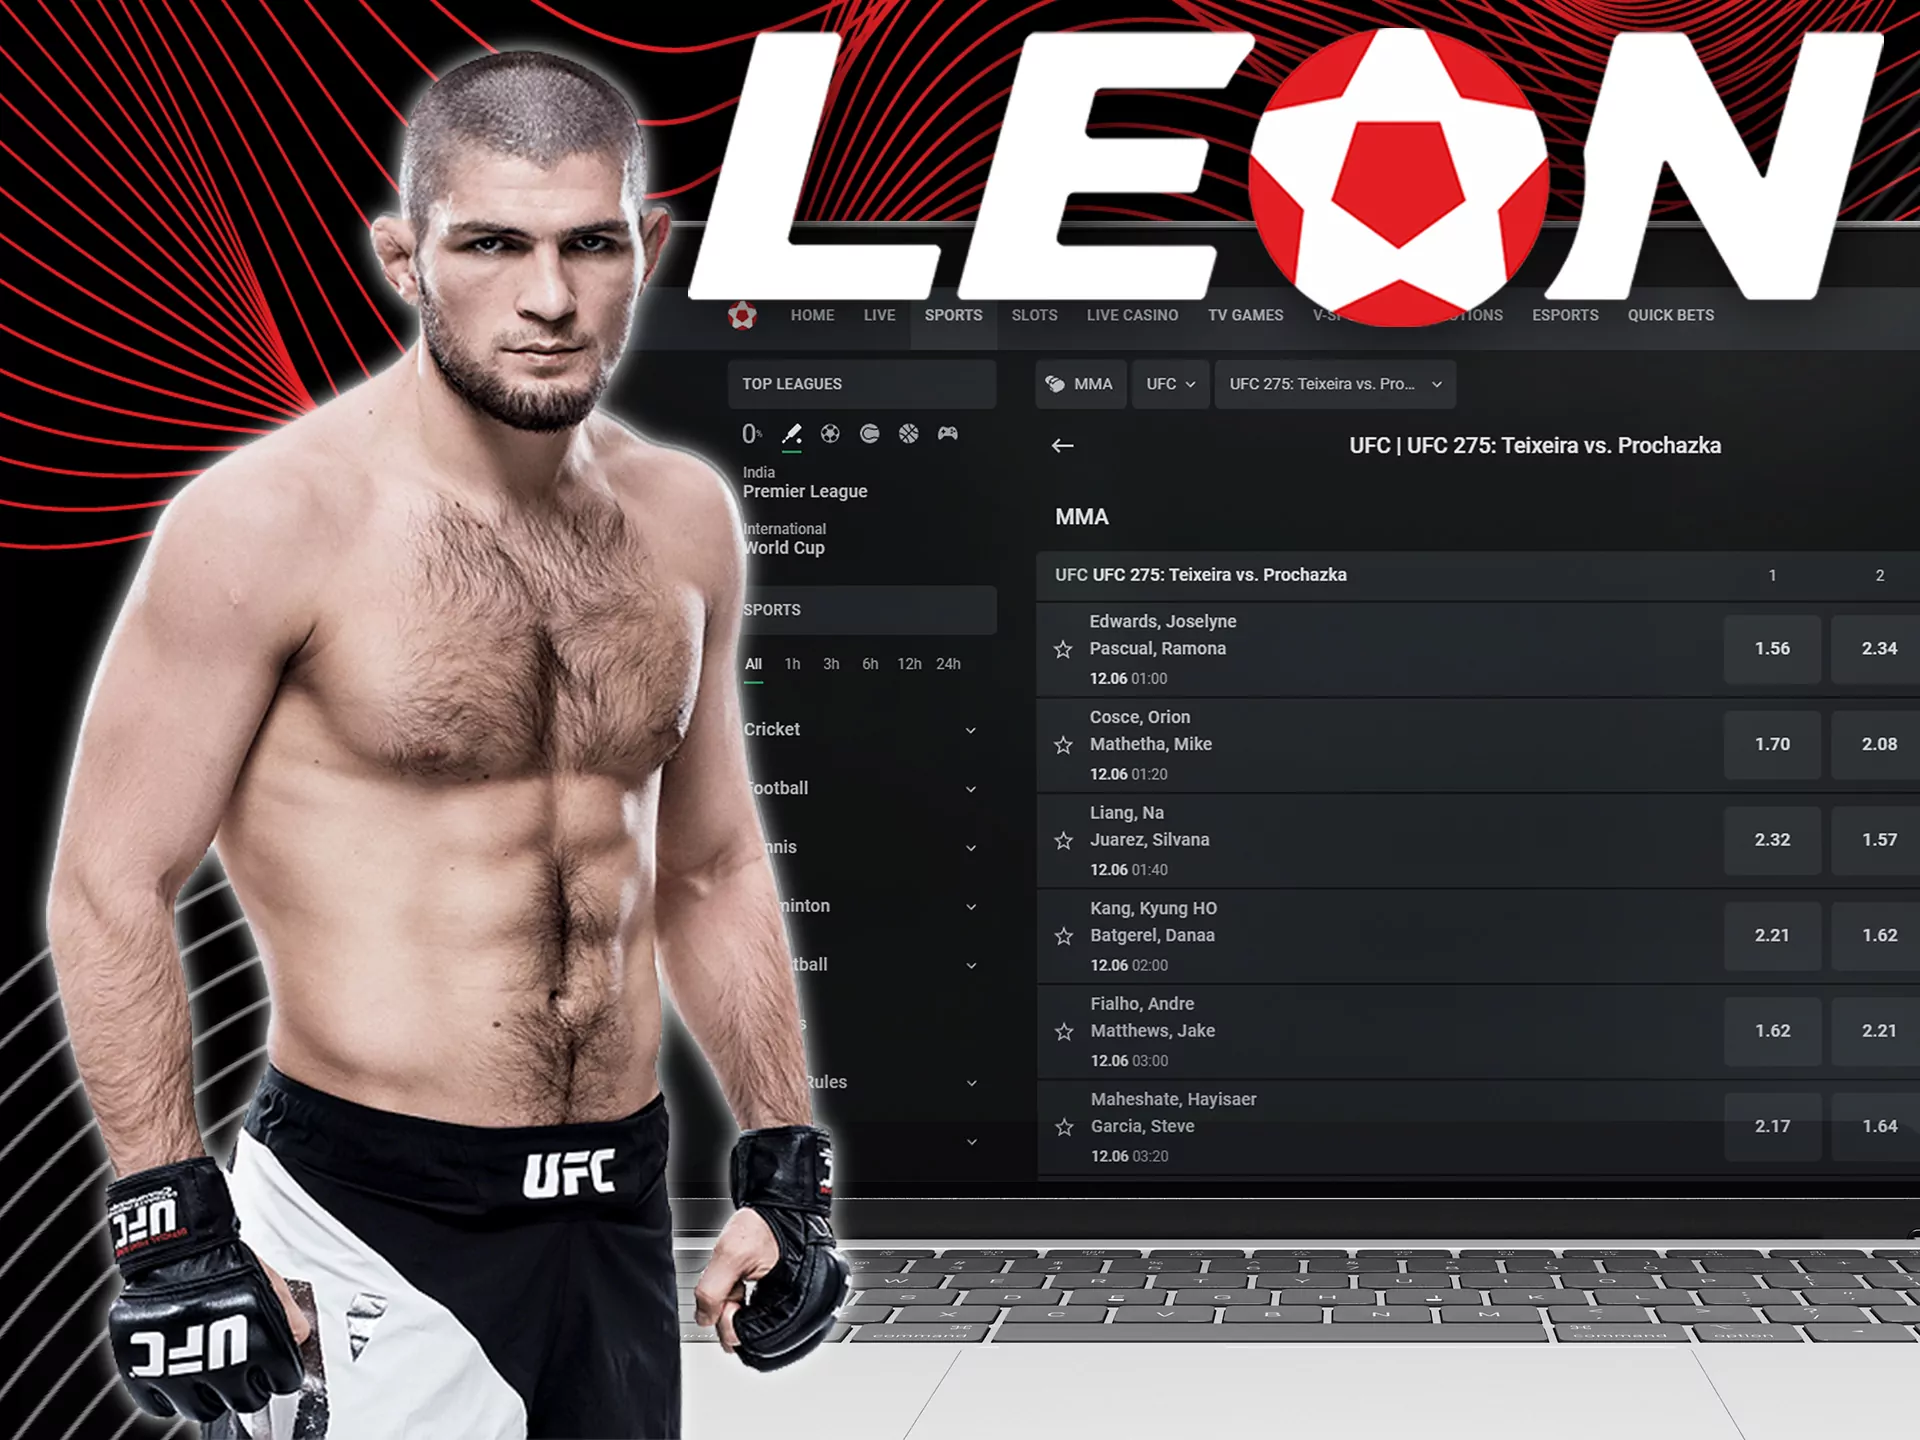 Bet on your favorite UFC fighters at Leon Bet.